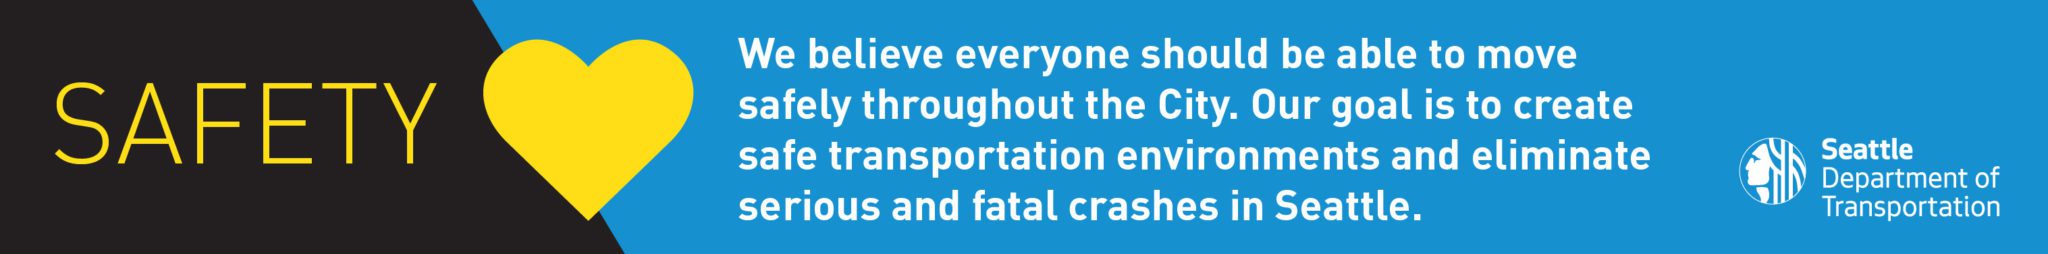 Graphic showing safety, one of SDOT's core values and goals. The word safety is in large text, with a yellow heart, and the SDOT logo.